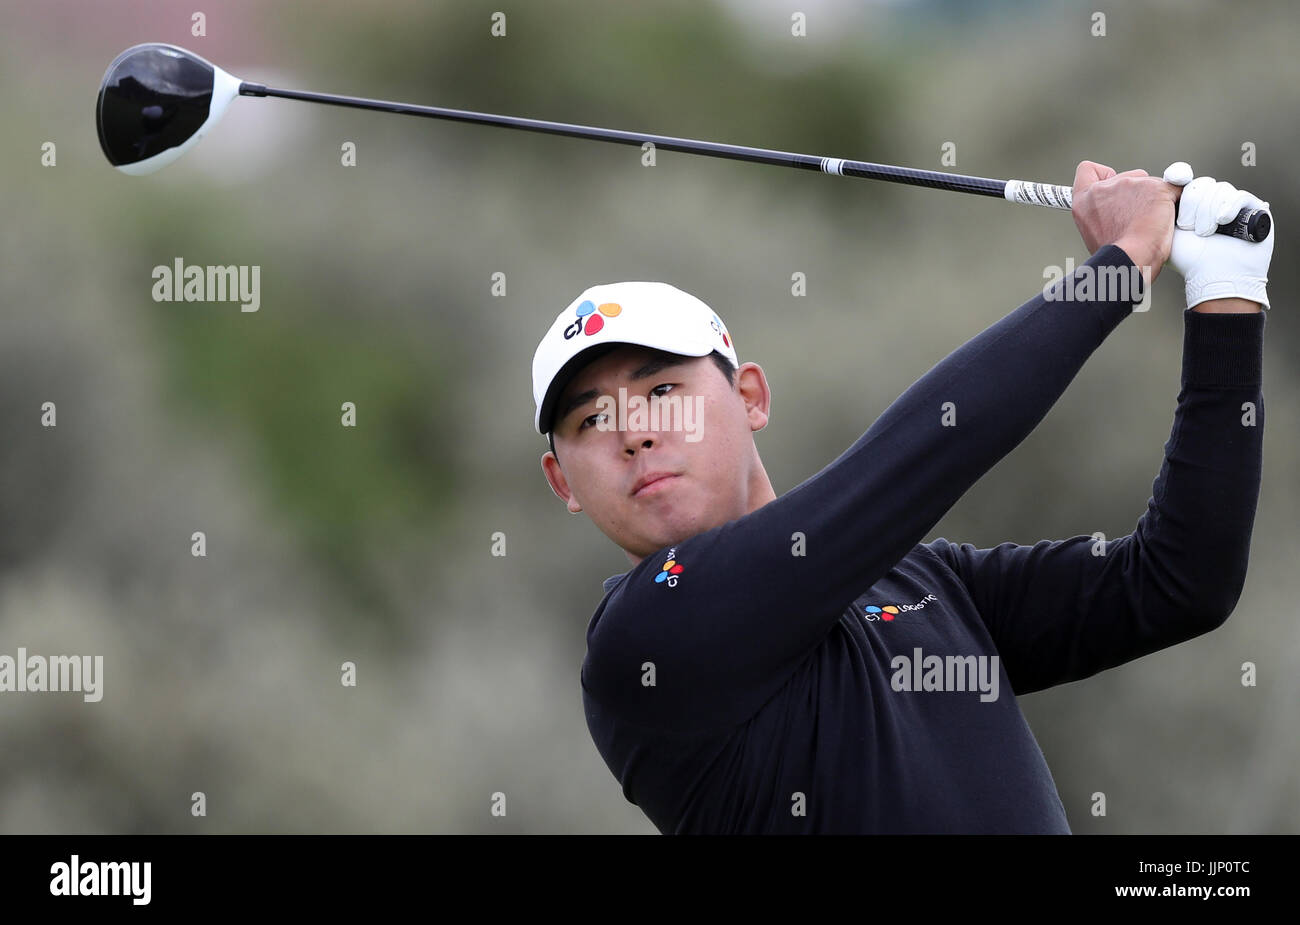 South Korea's Si-woo  Kim tees off the 2nd during day one of The Open Championship 2017 at Royal Birkdale Golf Club, Southport. PRESS ASSOCIATION Photo. Picture date: Thursday July 20, 2017. See PA story GOLF Open. Photo credit should read: Andrew Matthews/PA Wire. RESTRICTIONS: Editorial use only. No commercial use. Still image use only. The Open Championship logo and clear link to The Open website (TheOpen.com) to be included on website publishing. Stock Photo